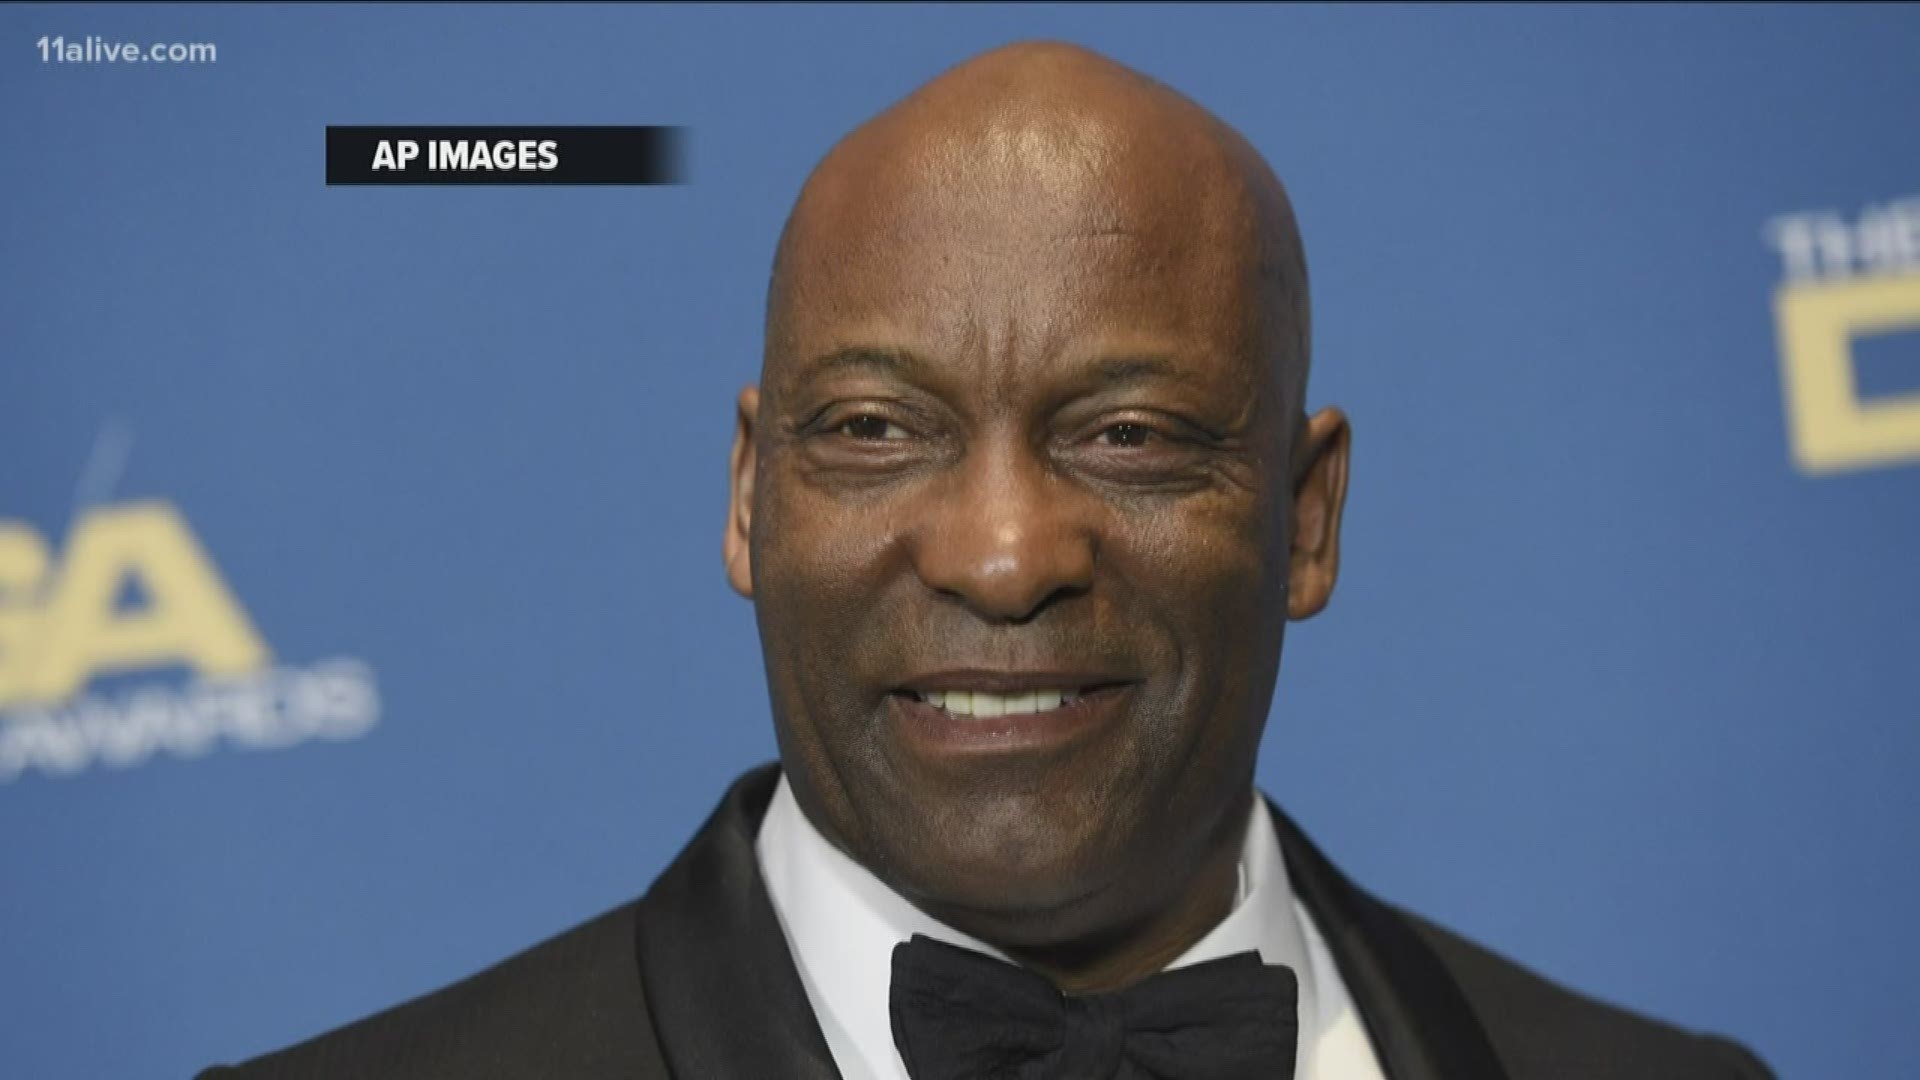 ‘Boyz N the Hood” director John Singleton has died, just days after his family shared that he was in a coma at a Los Angeles hospital after suffering a major stroke.